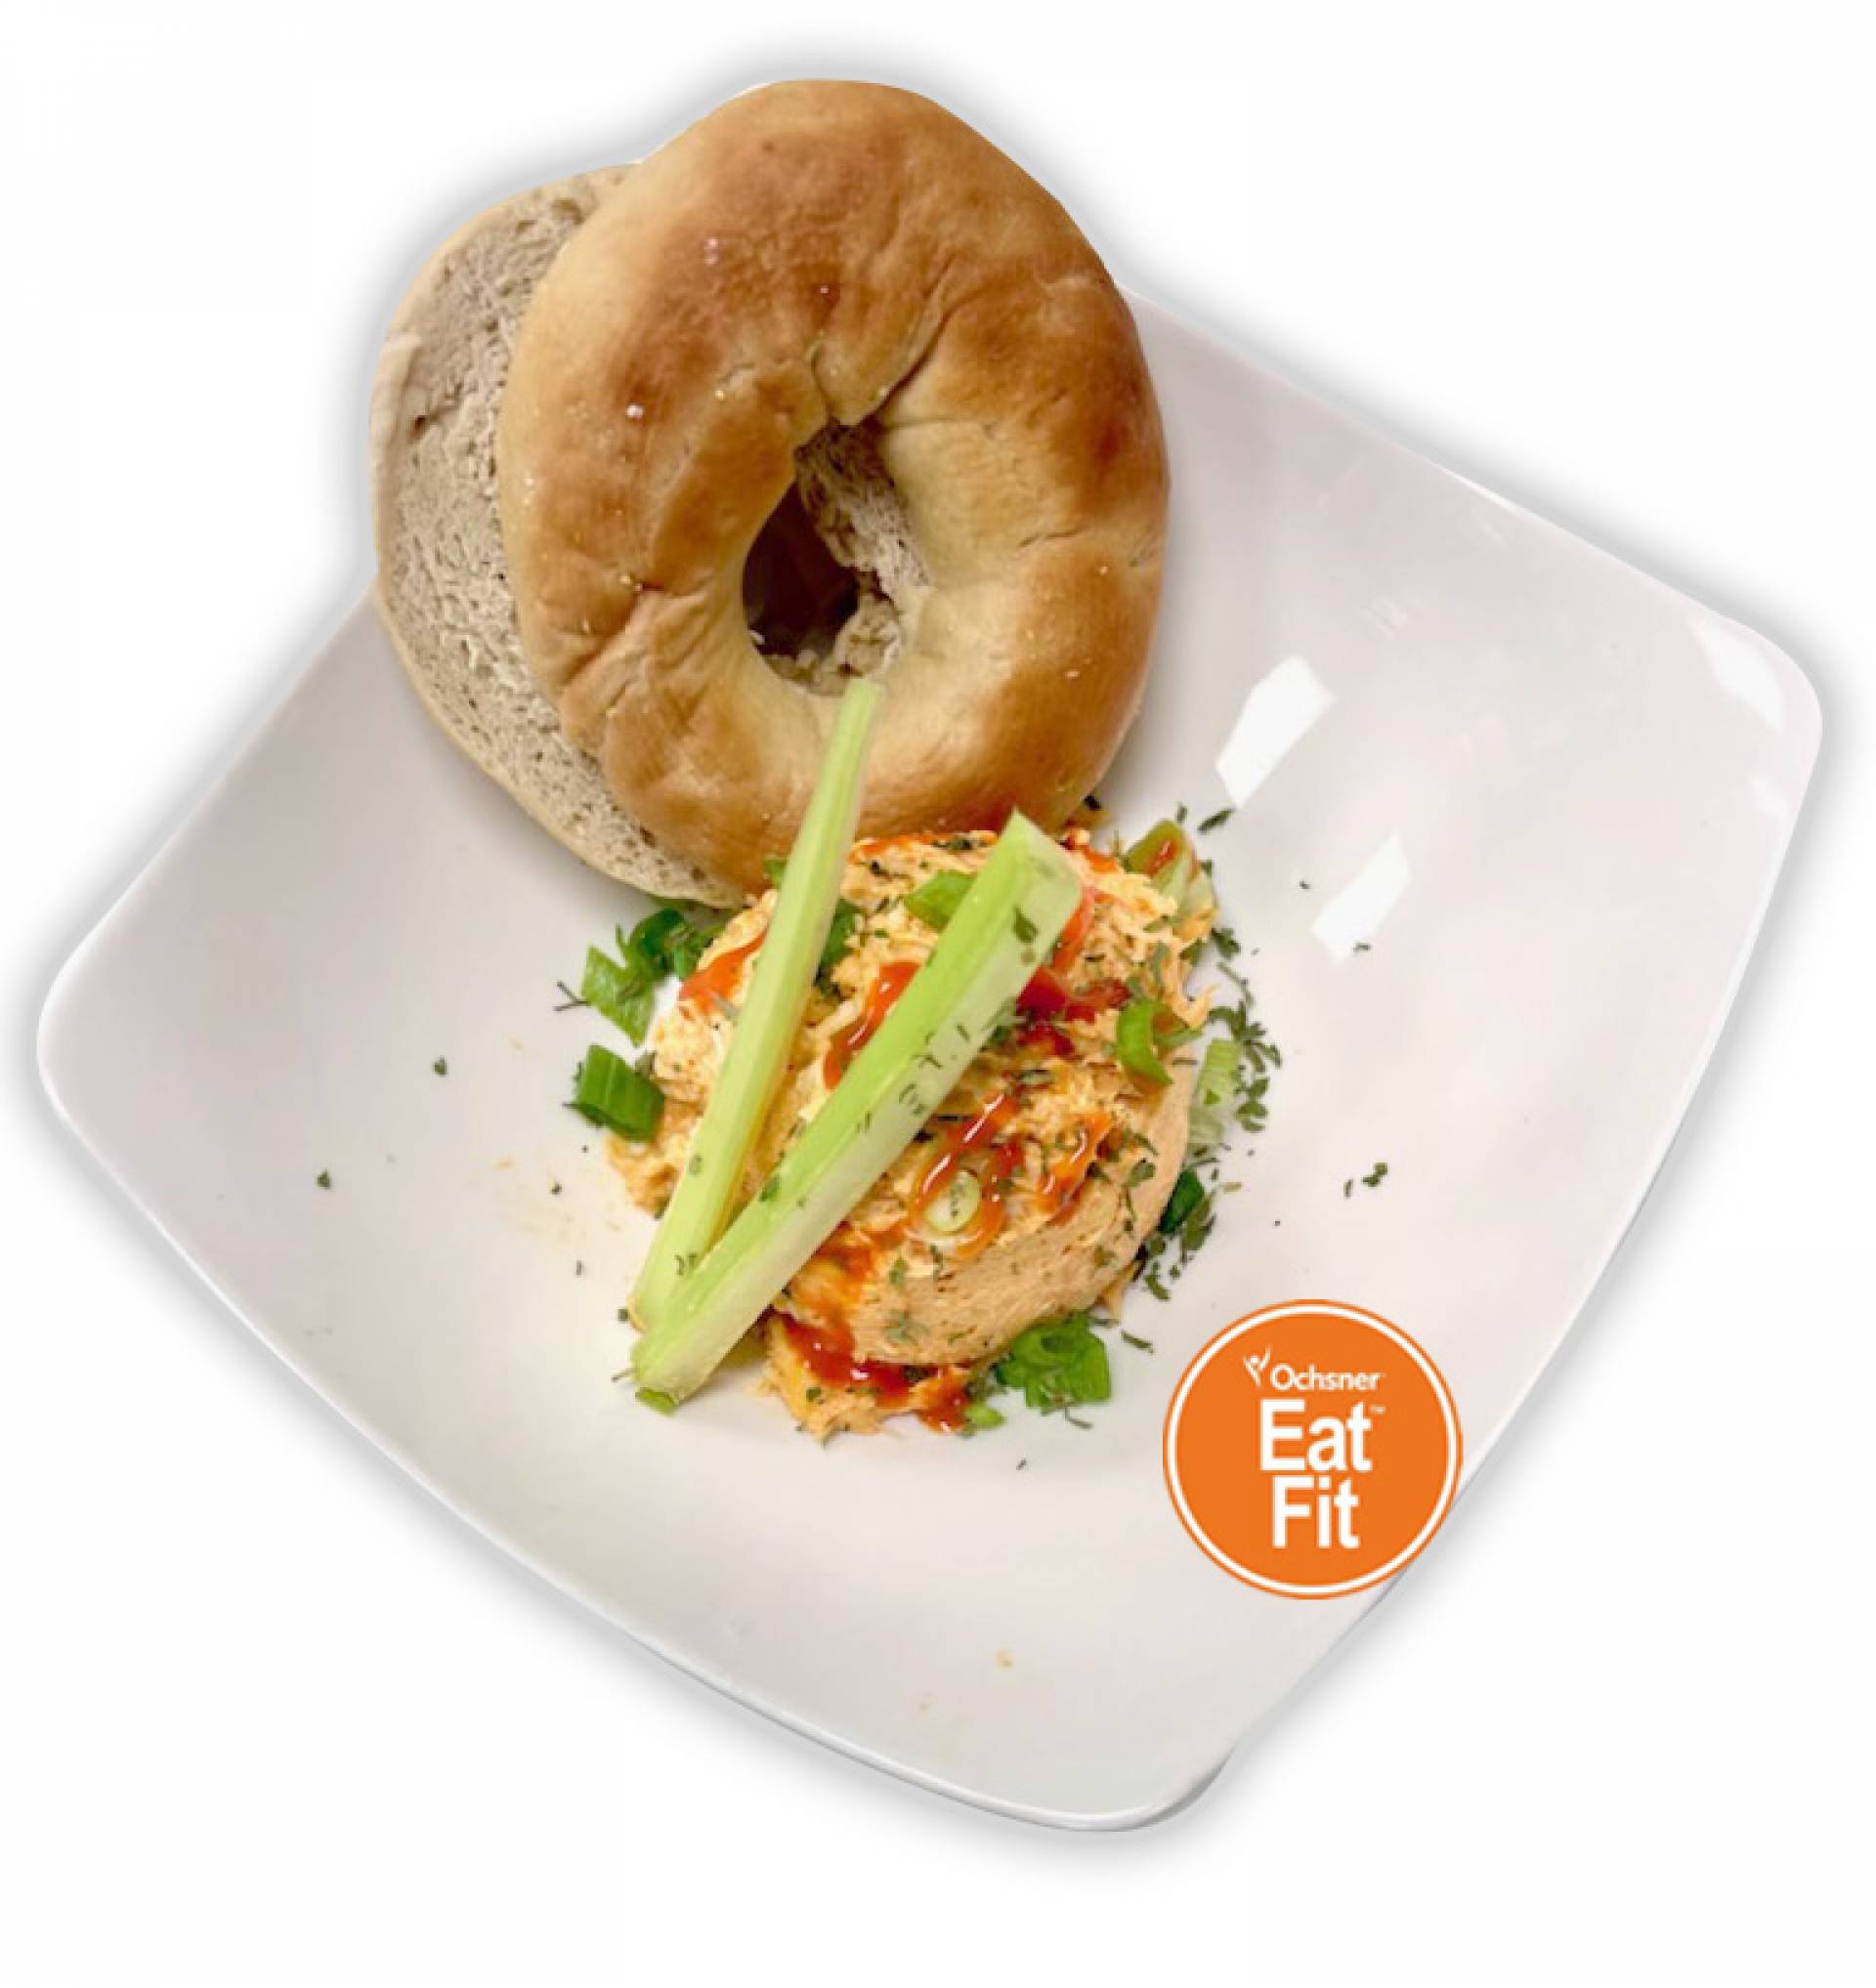 Buffalo Chicken Salad with a Bagel - Paleo